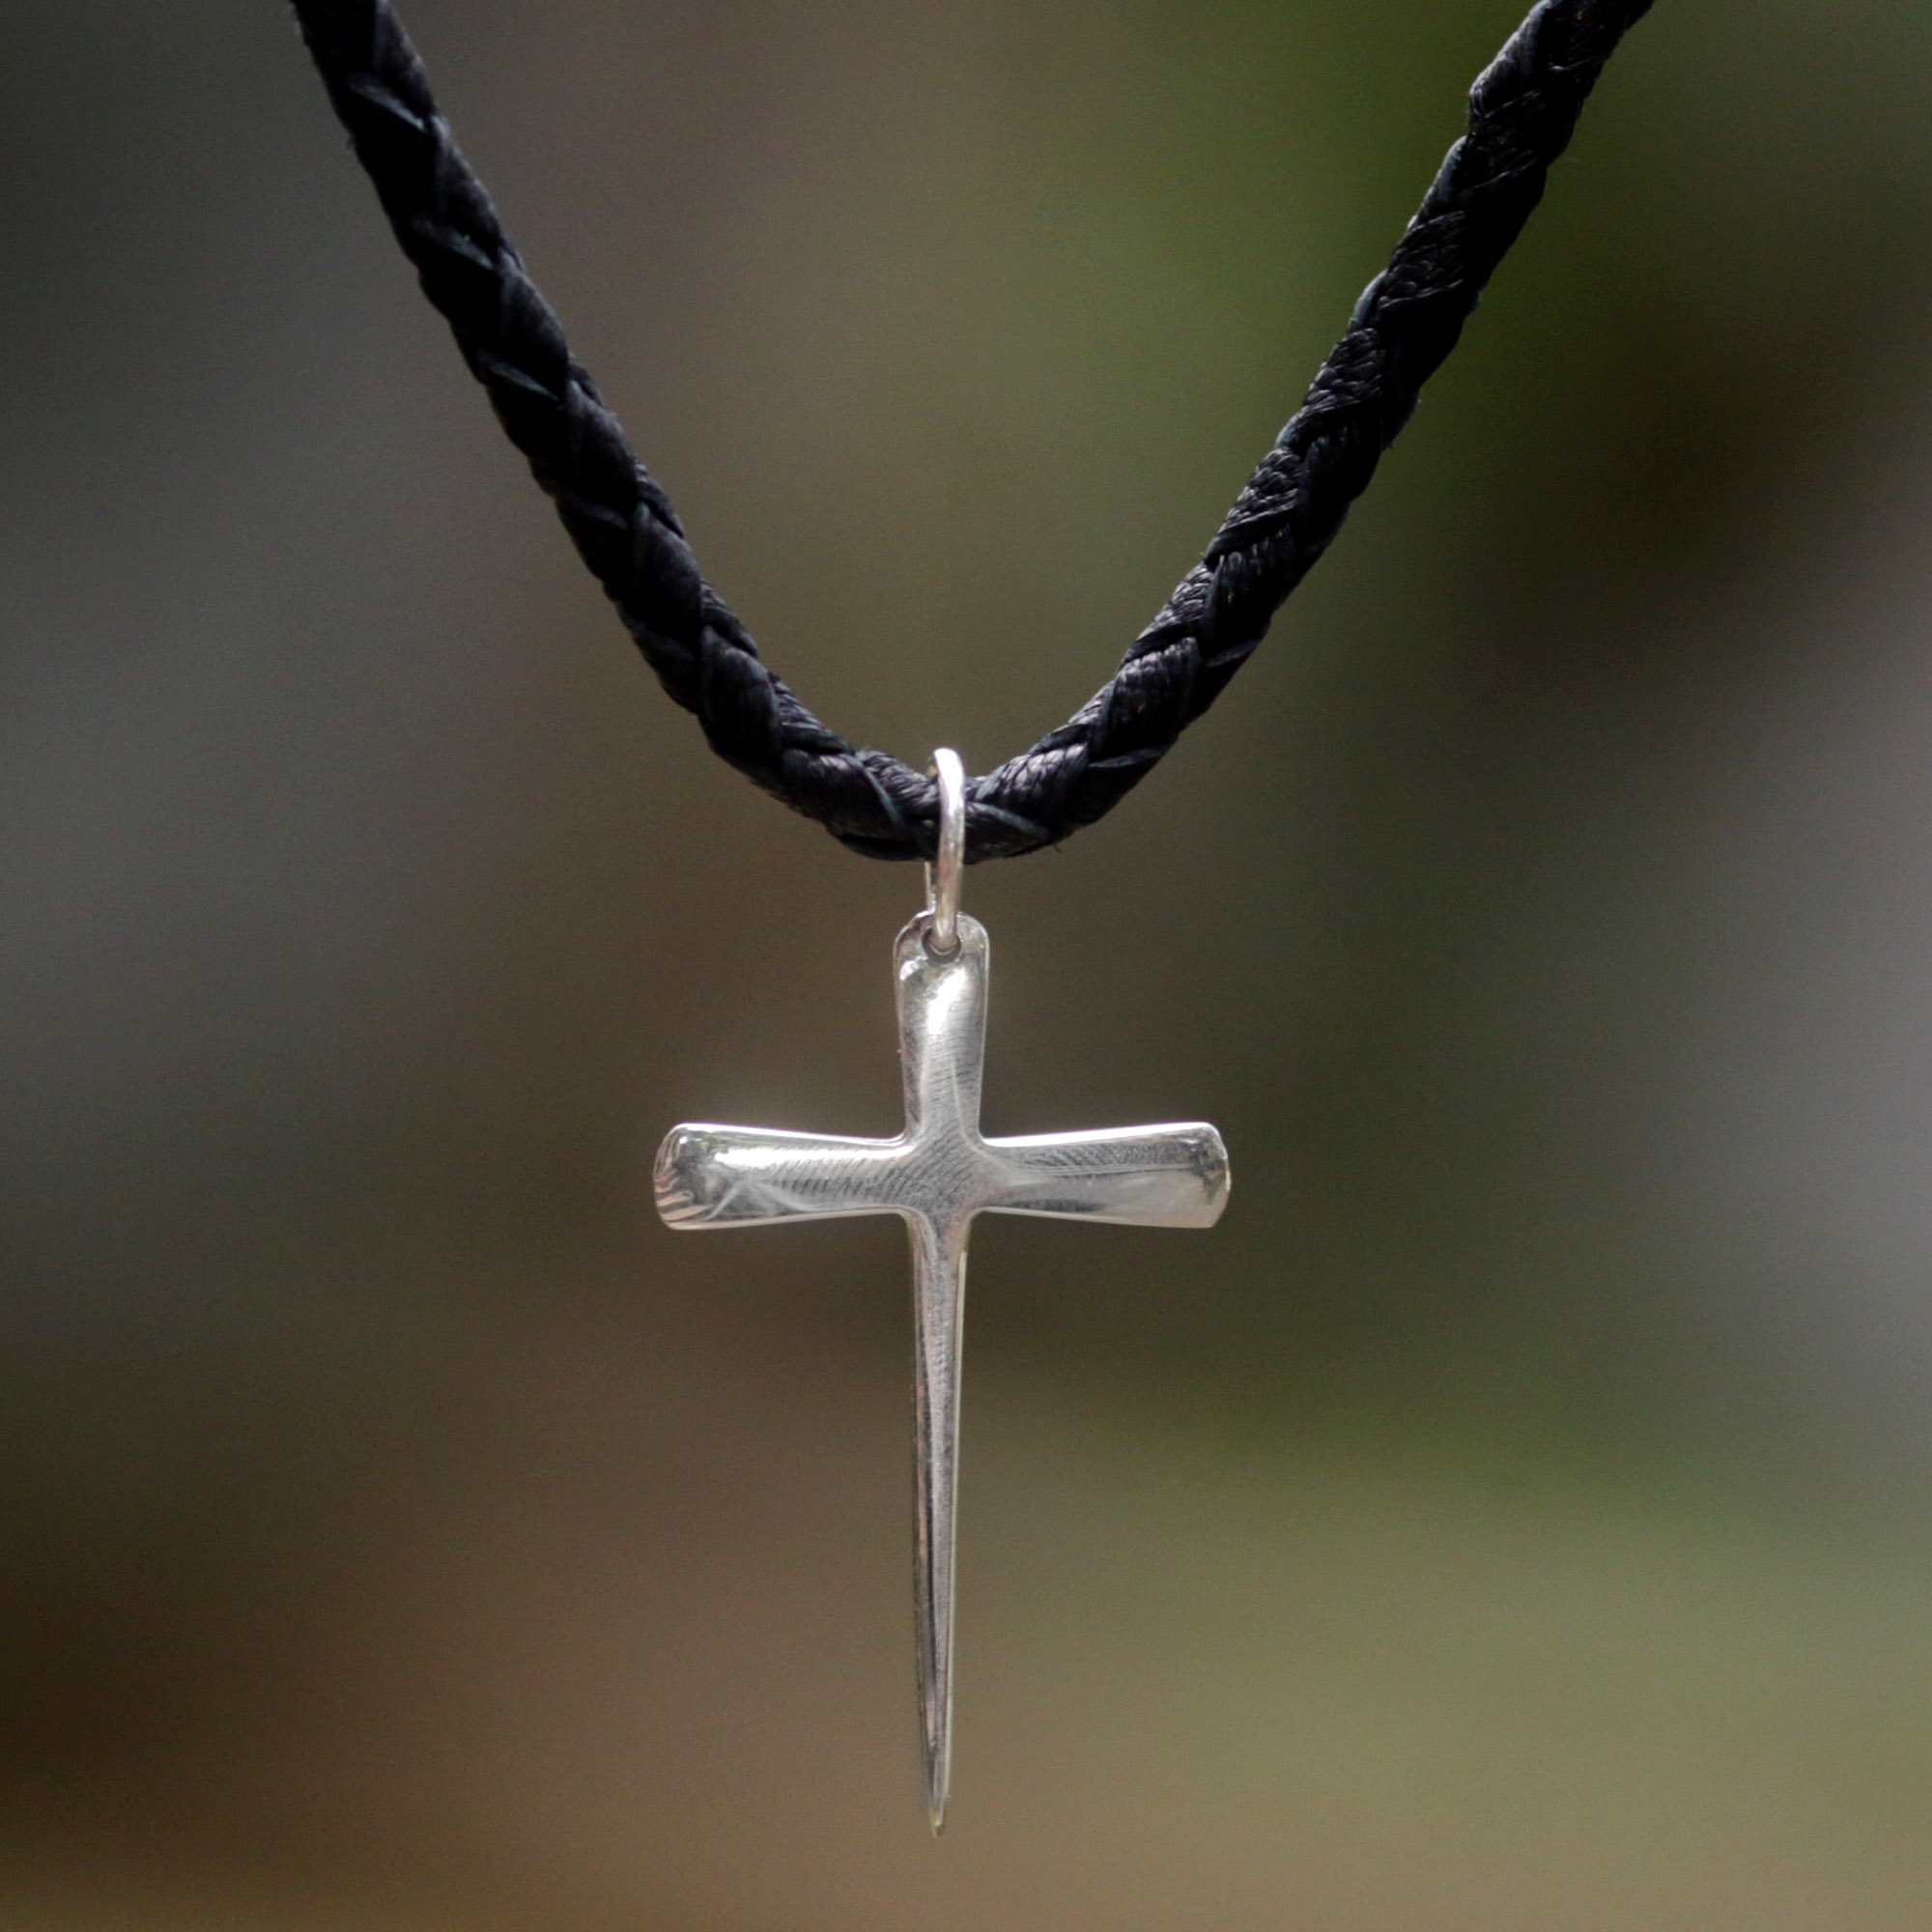 Mens Sterling Silver Large Crucifix Pendant On A Black Leather Cord Necklace